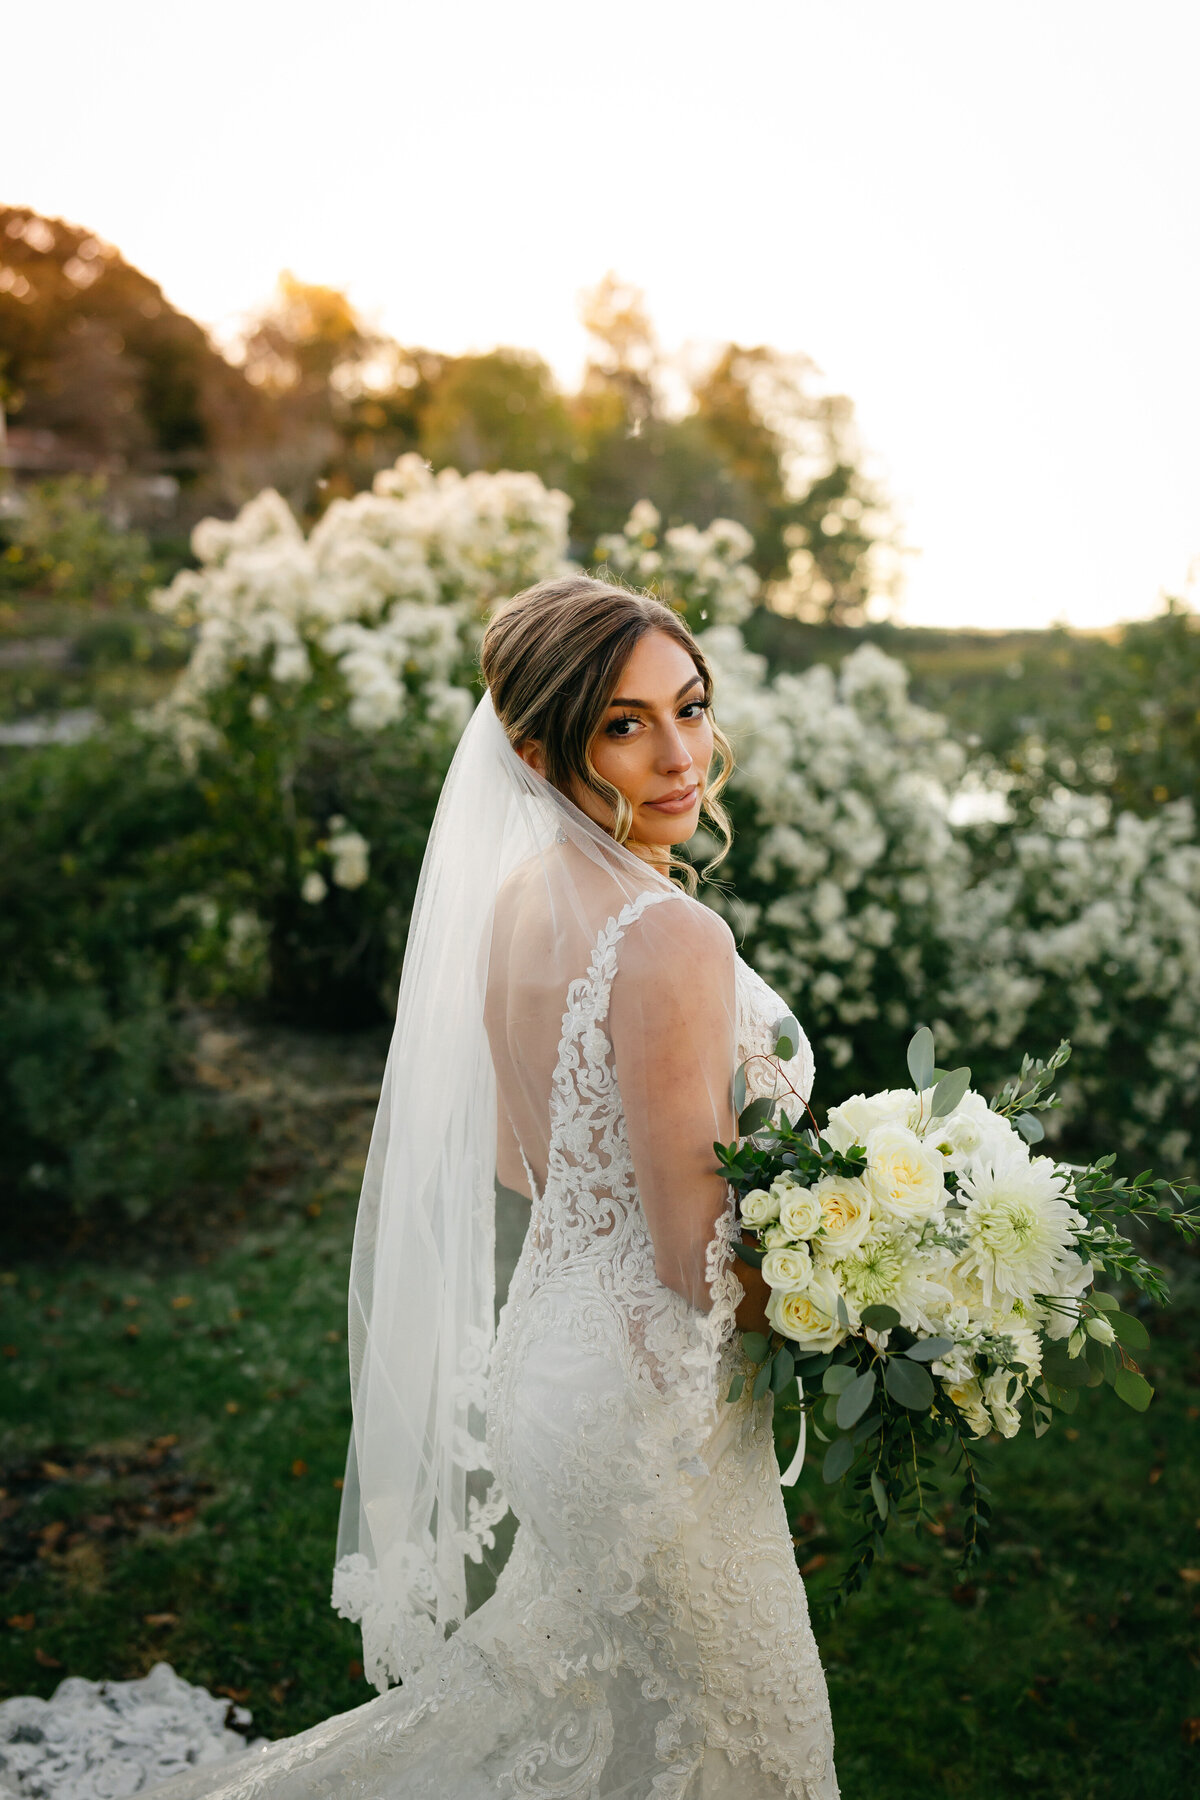 Bride portrait with blond hair in a low bun